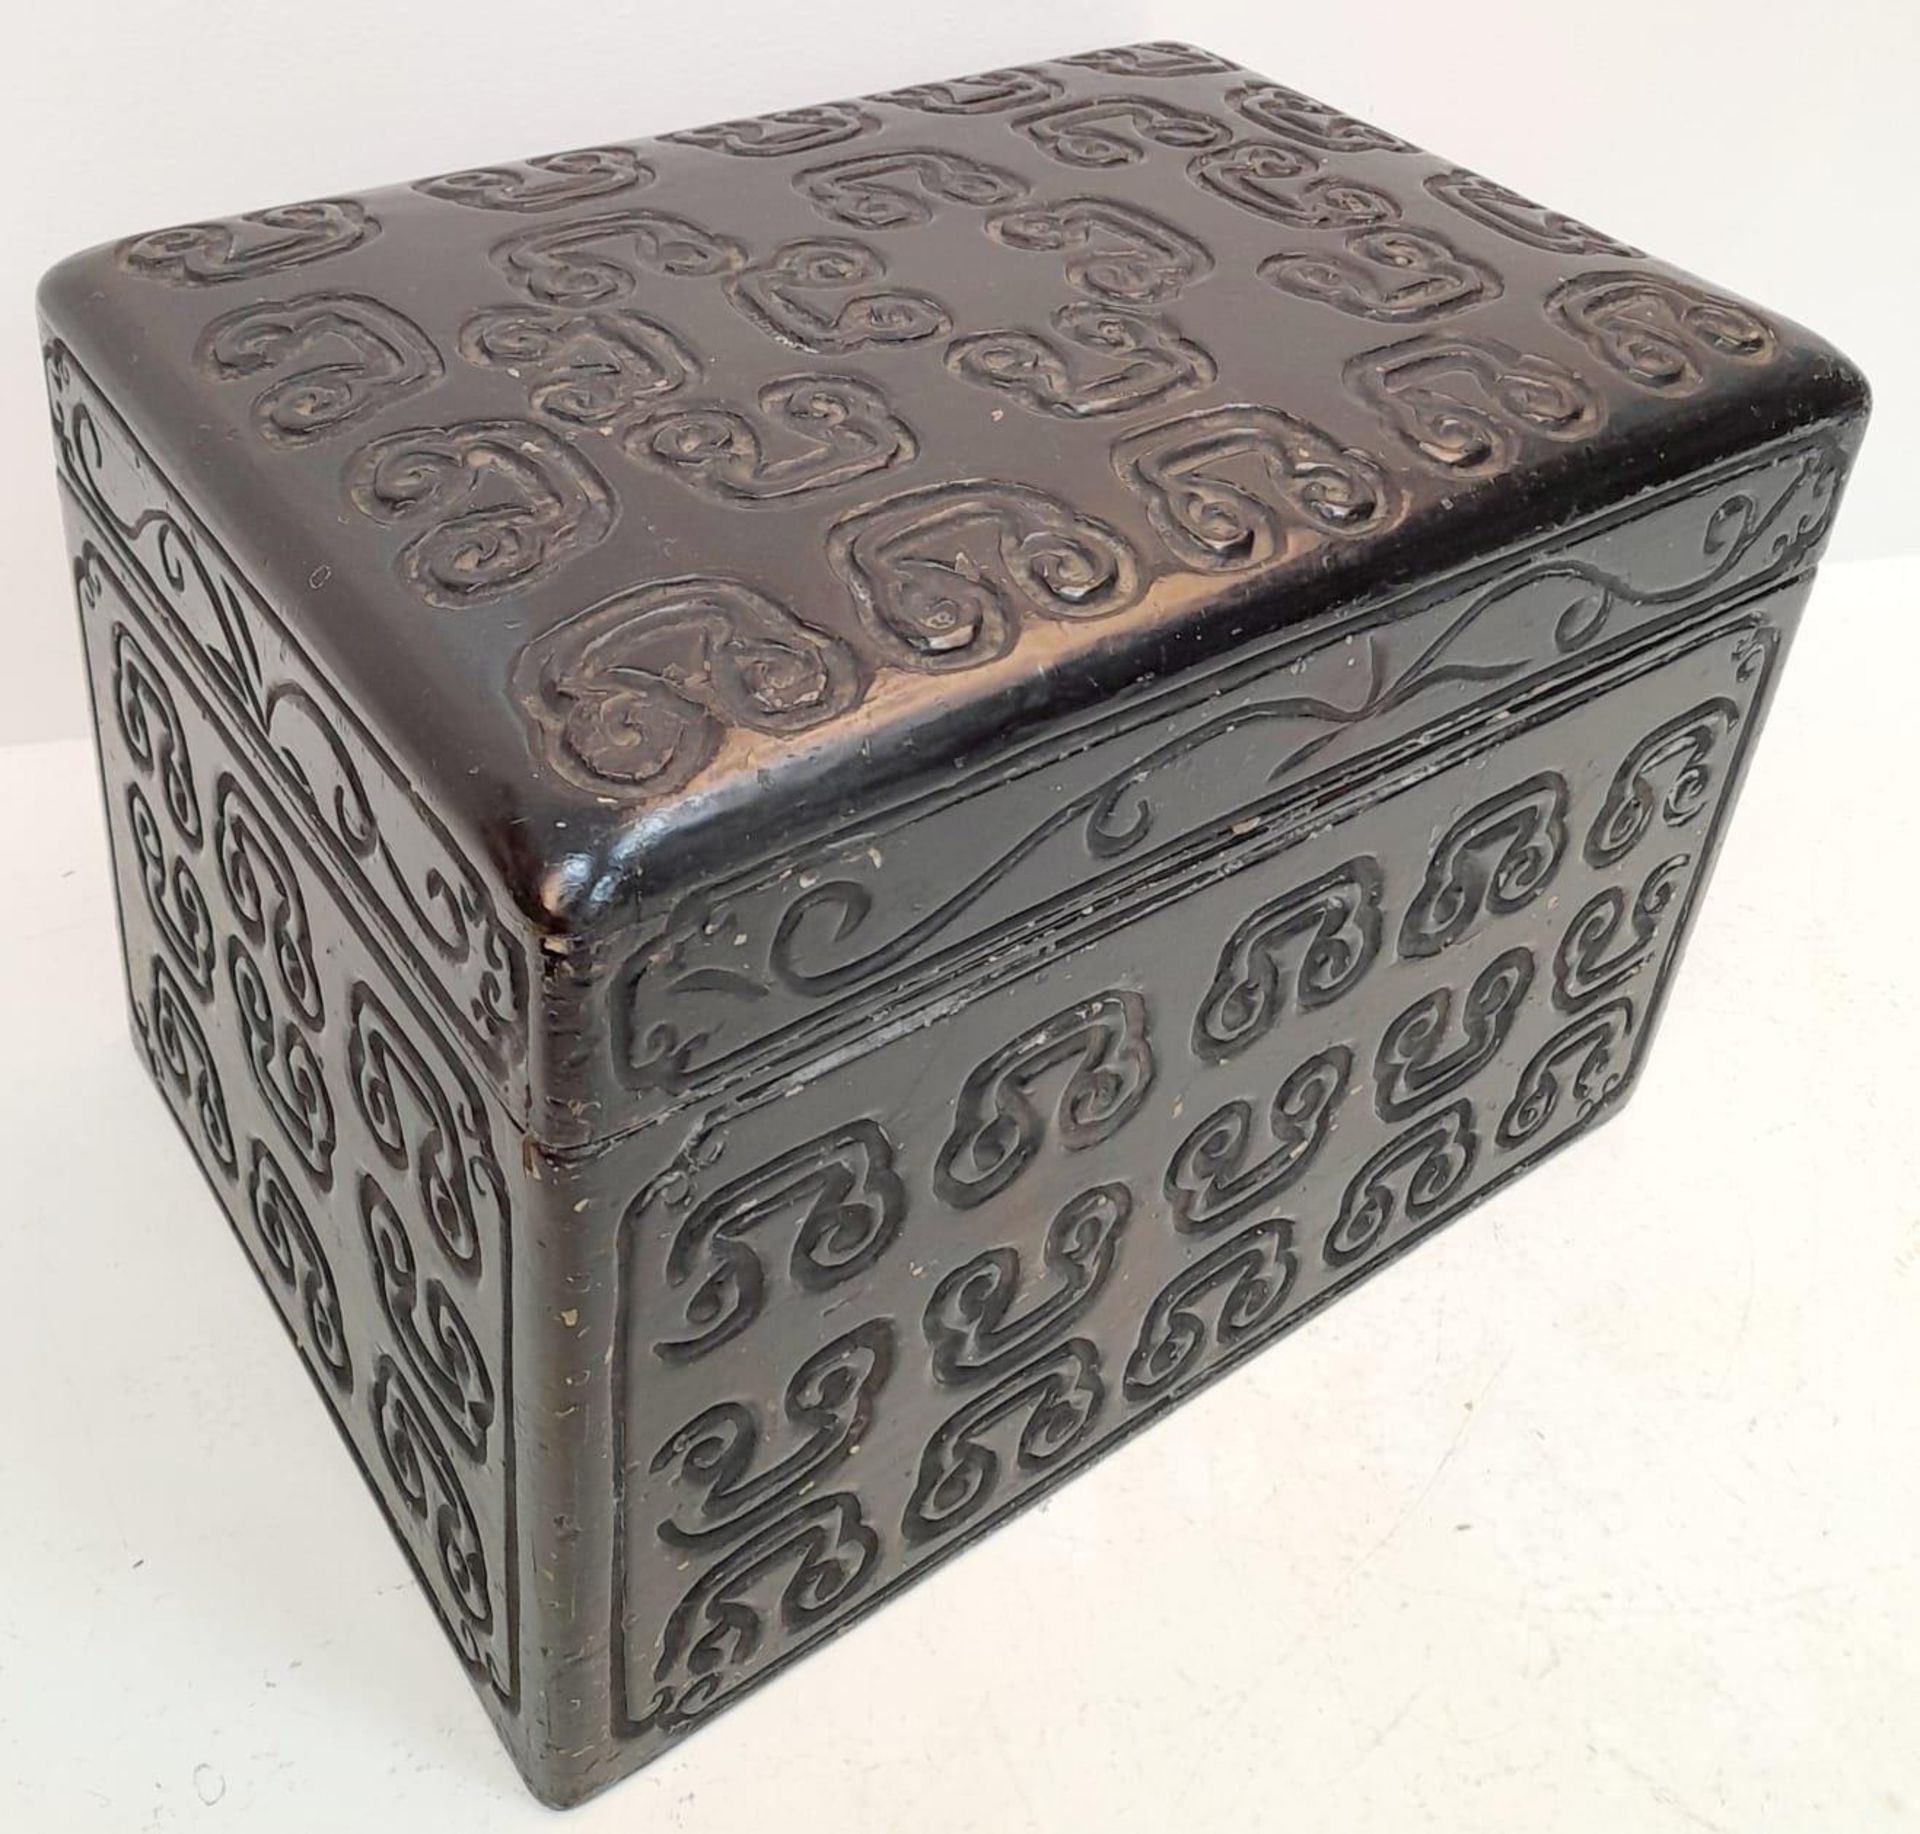 A Fascinating and Wonderful Antique Chinese Large Lacquered Box - 18th century, possibly earlier. - Image 3 of 7